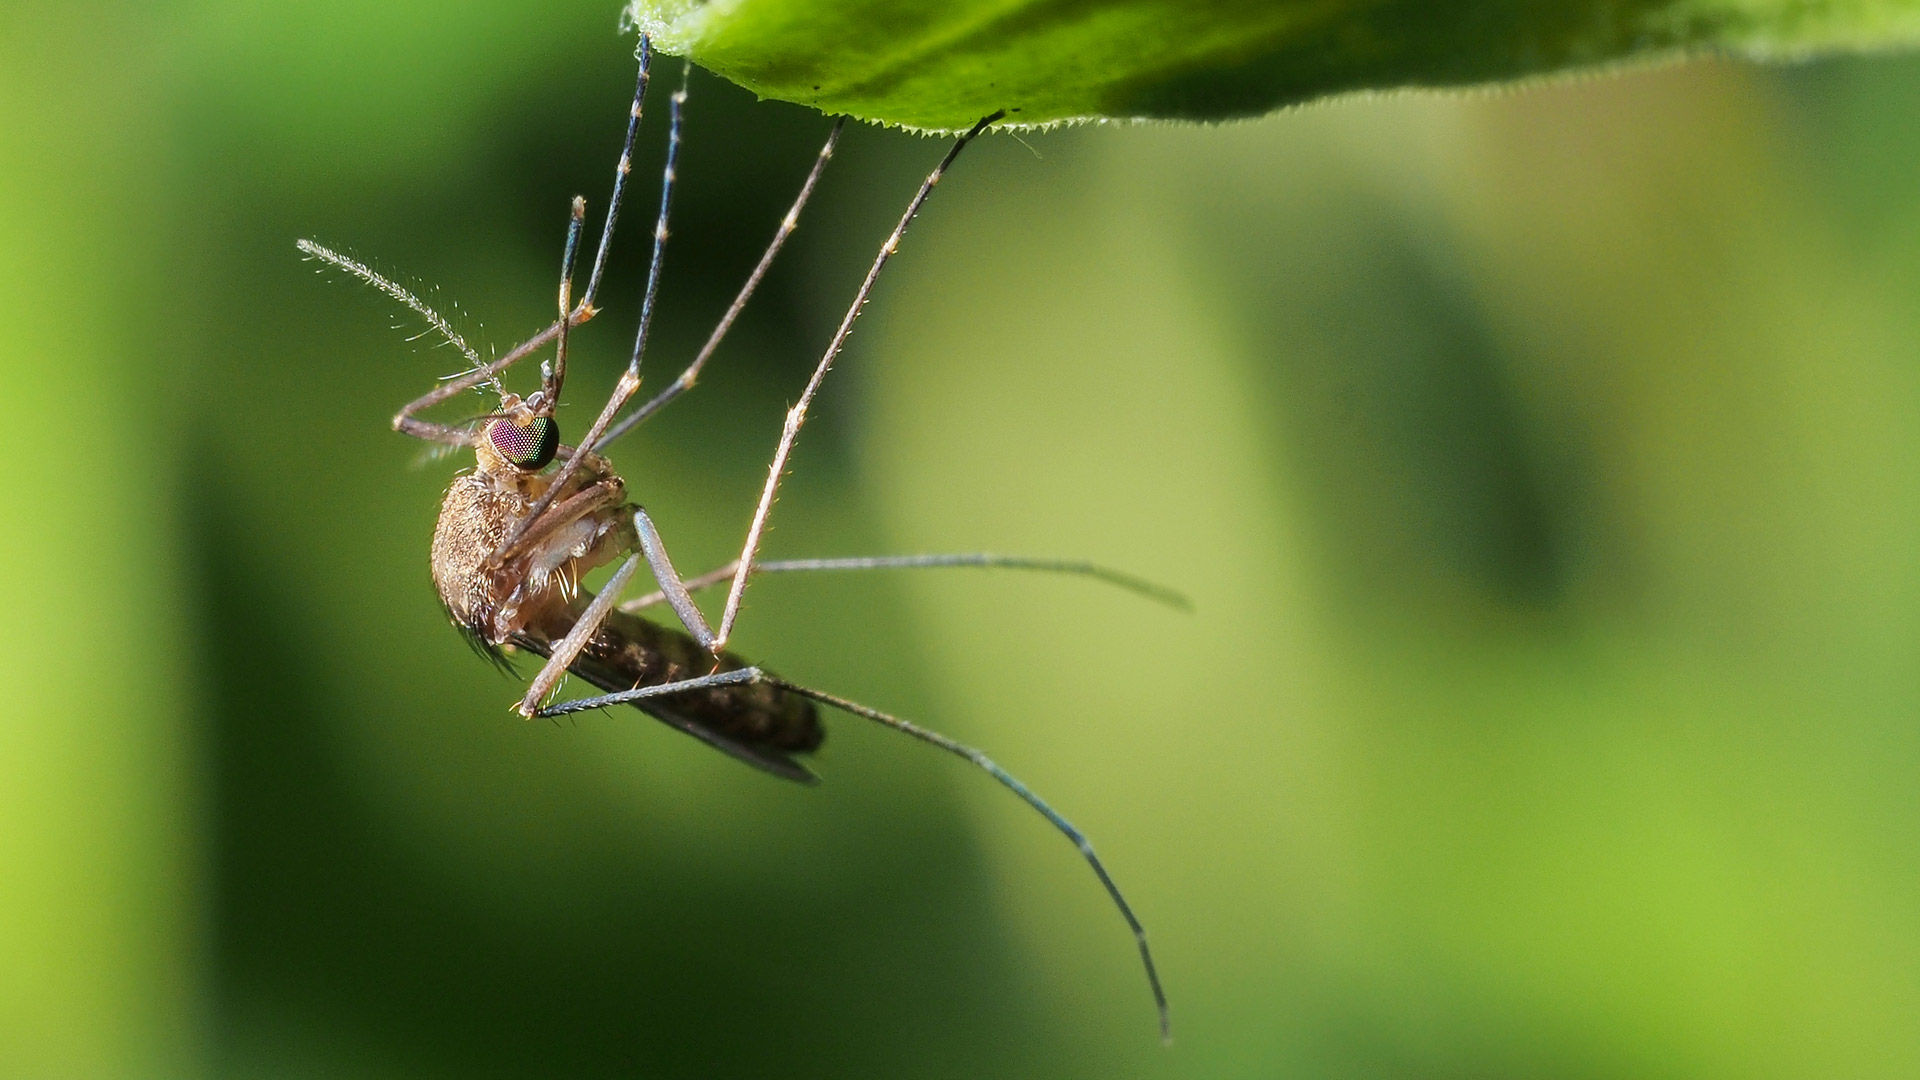 Don’t Botch Mosquito Control - Always Hire Professionals to Treat Your Lawn